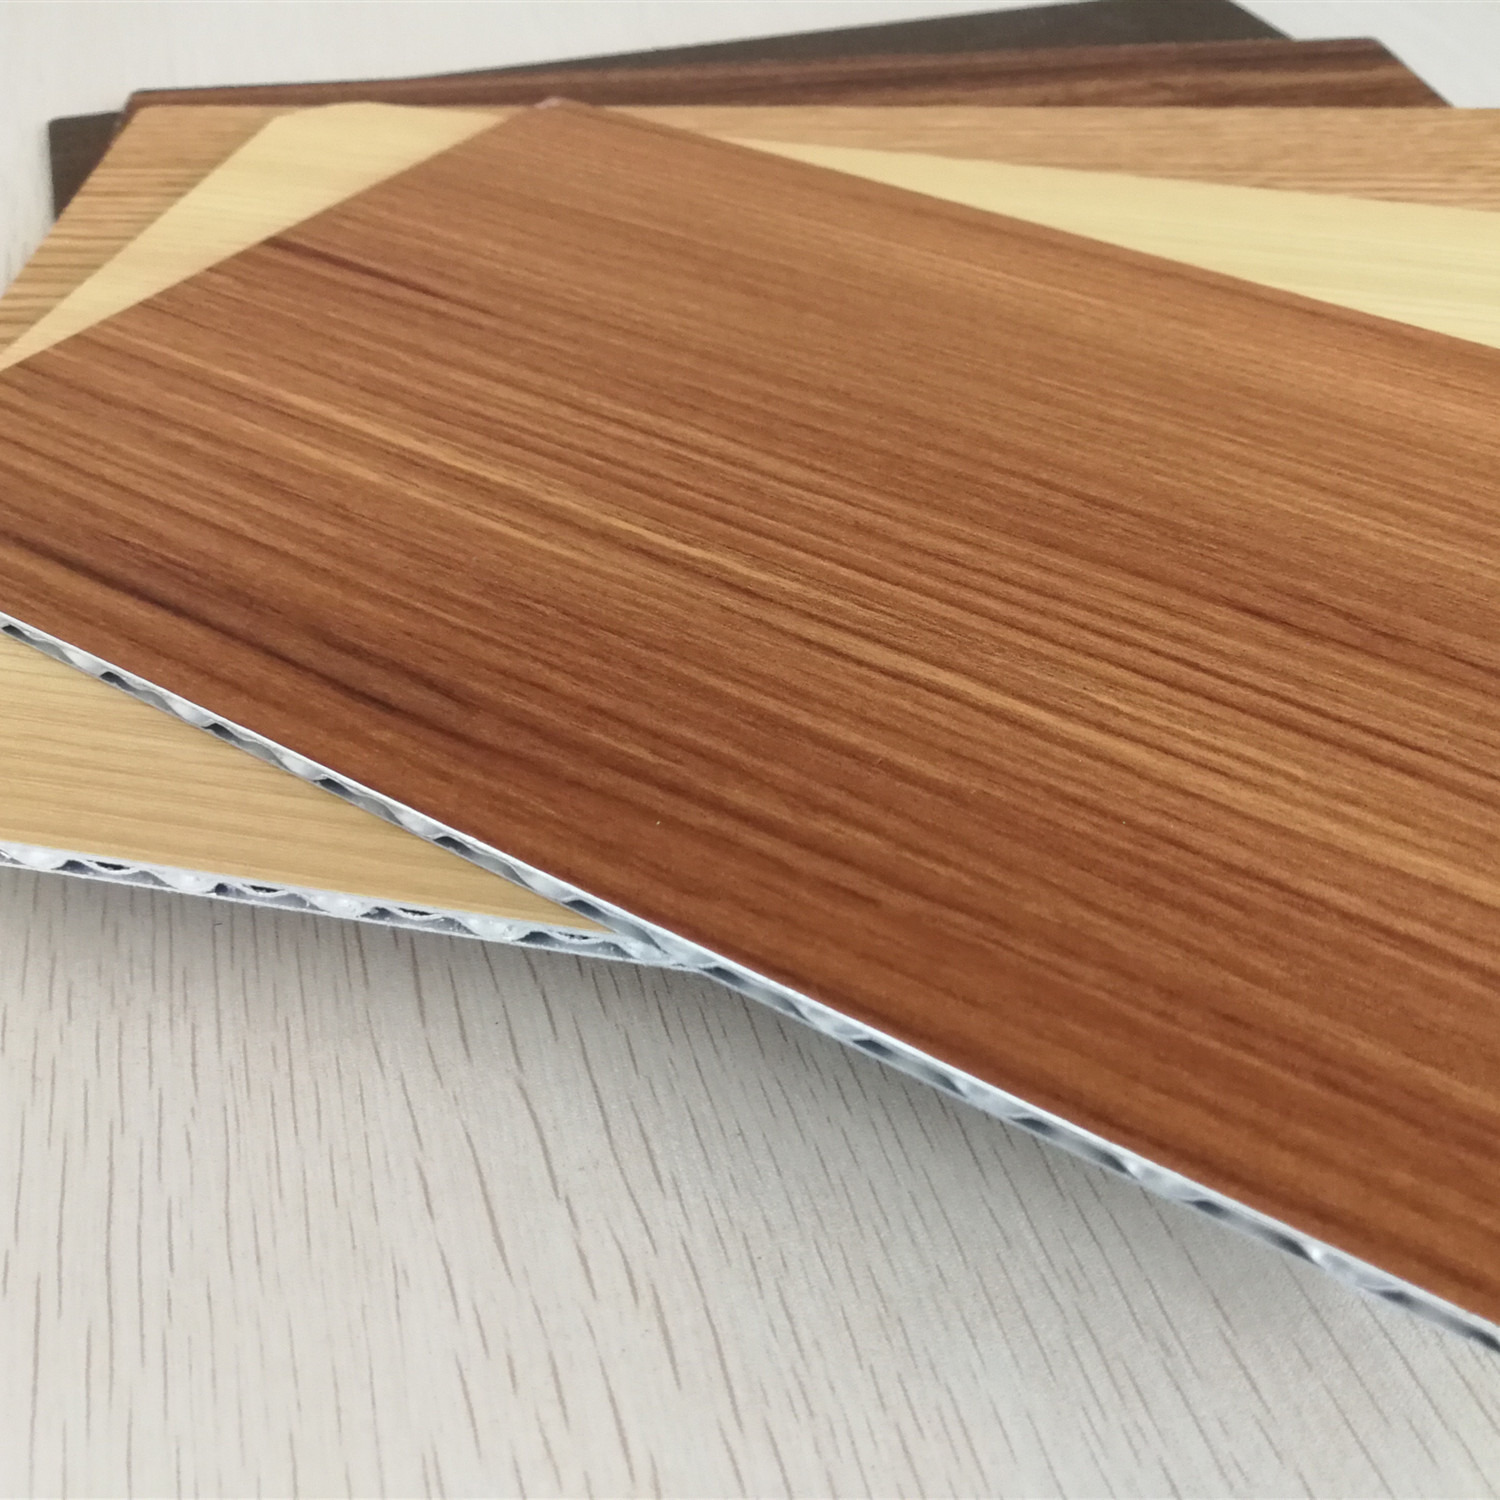 Quality 4mm Thick Wood Grain Aluminum Core Panel For Indoor Outdoor Decoration for sale